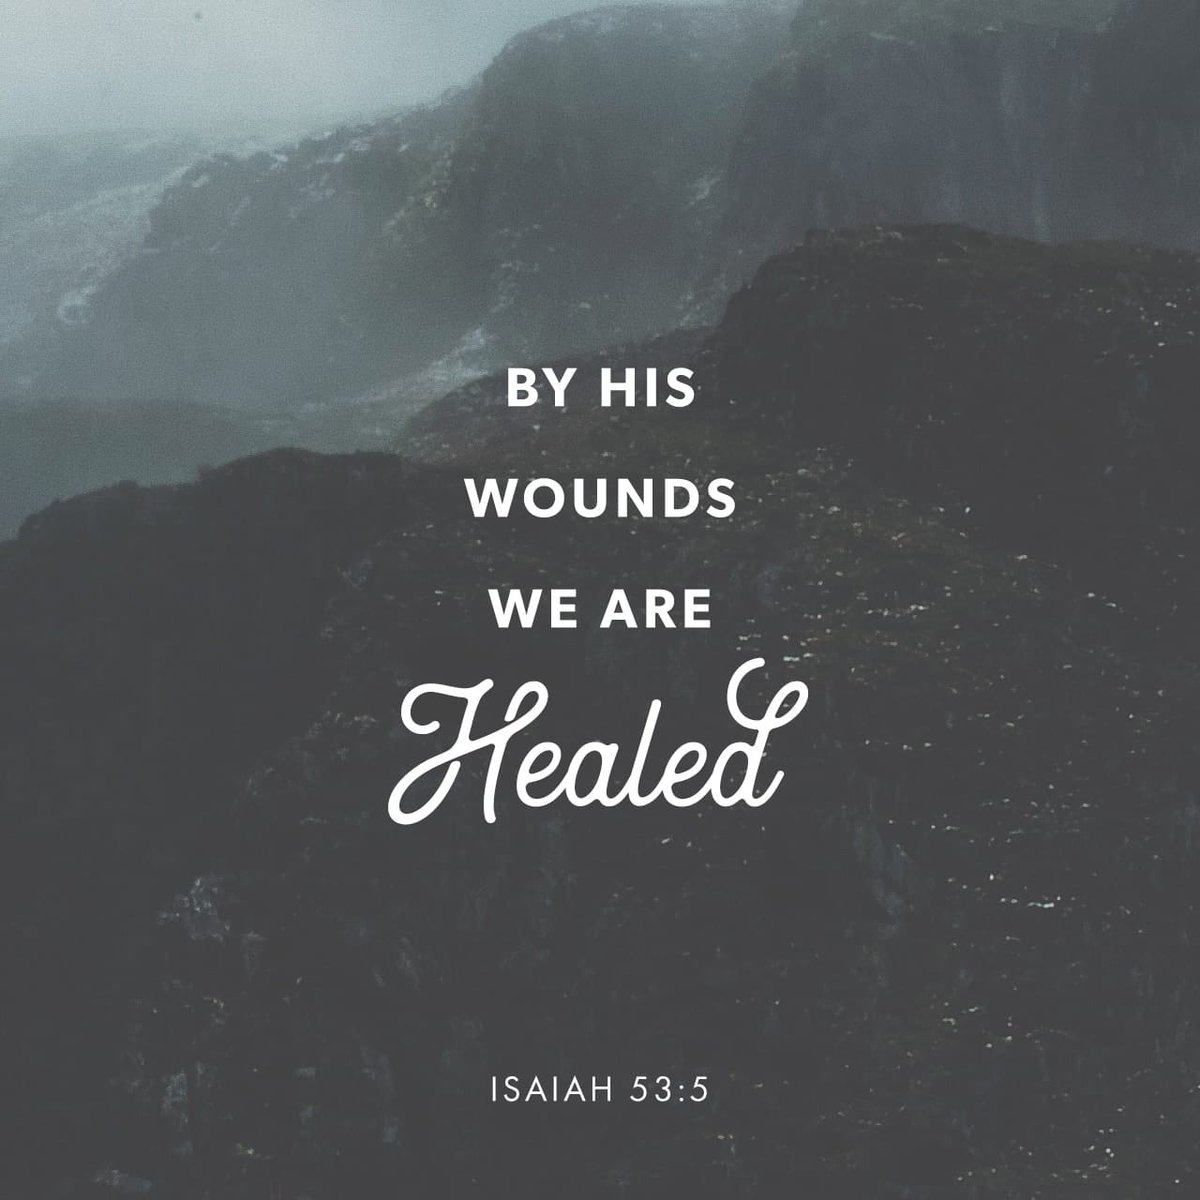 But He was pierced through for our transgressions, He was crushed for our iniquities; the chastening for our well-being fell upon Him, and by His scourging we are healed. #dailybread #dailyverse #scripture #bibleverse #bible #jesus